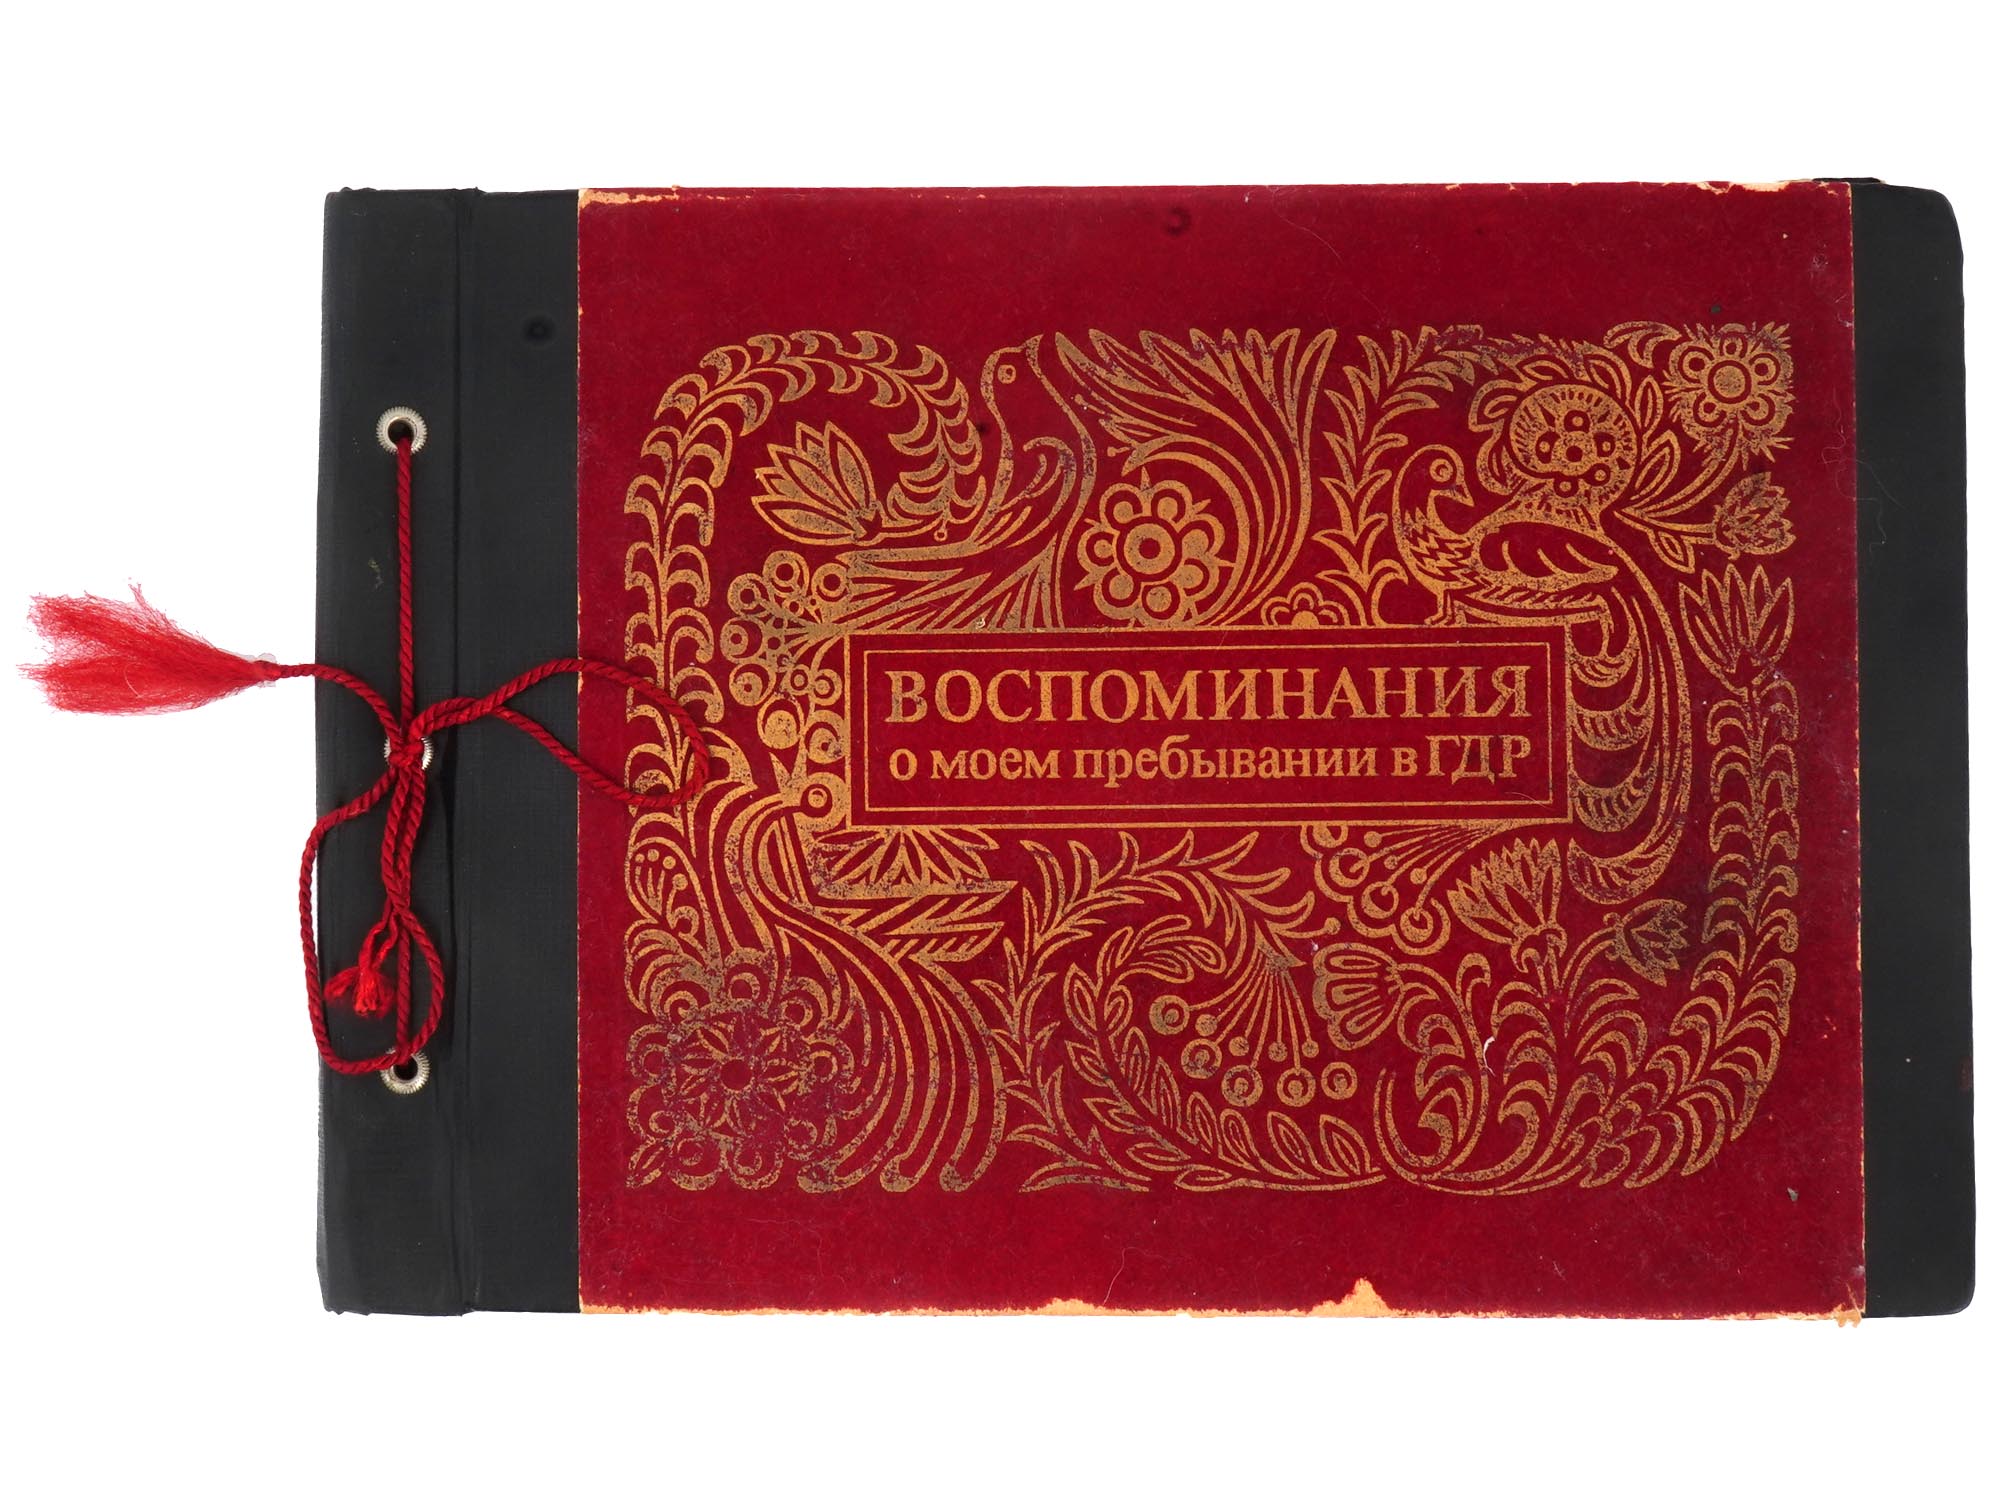 TWO SOVIET MILITARY PHOTO ALBUMS PIC-1